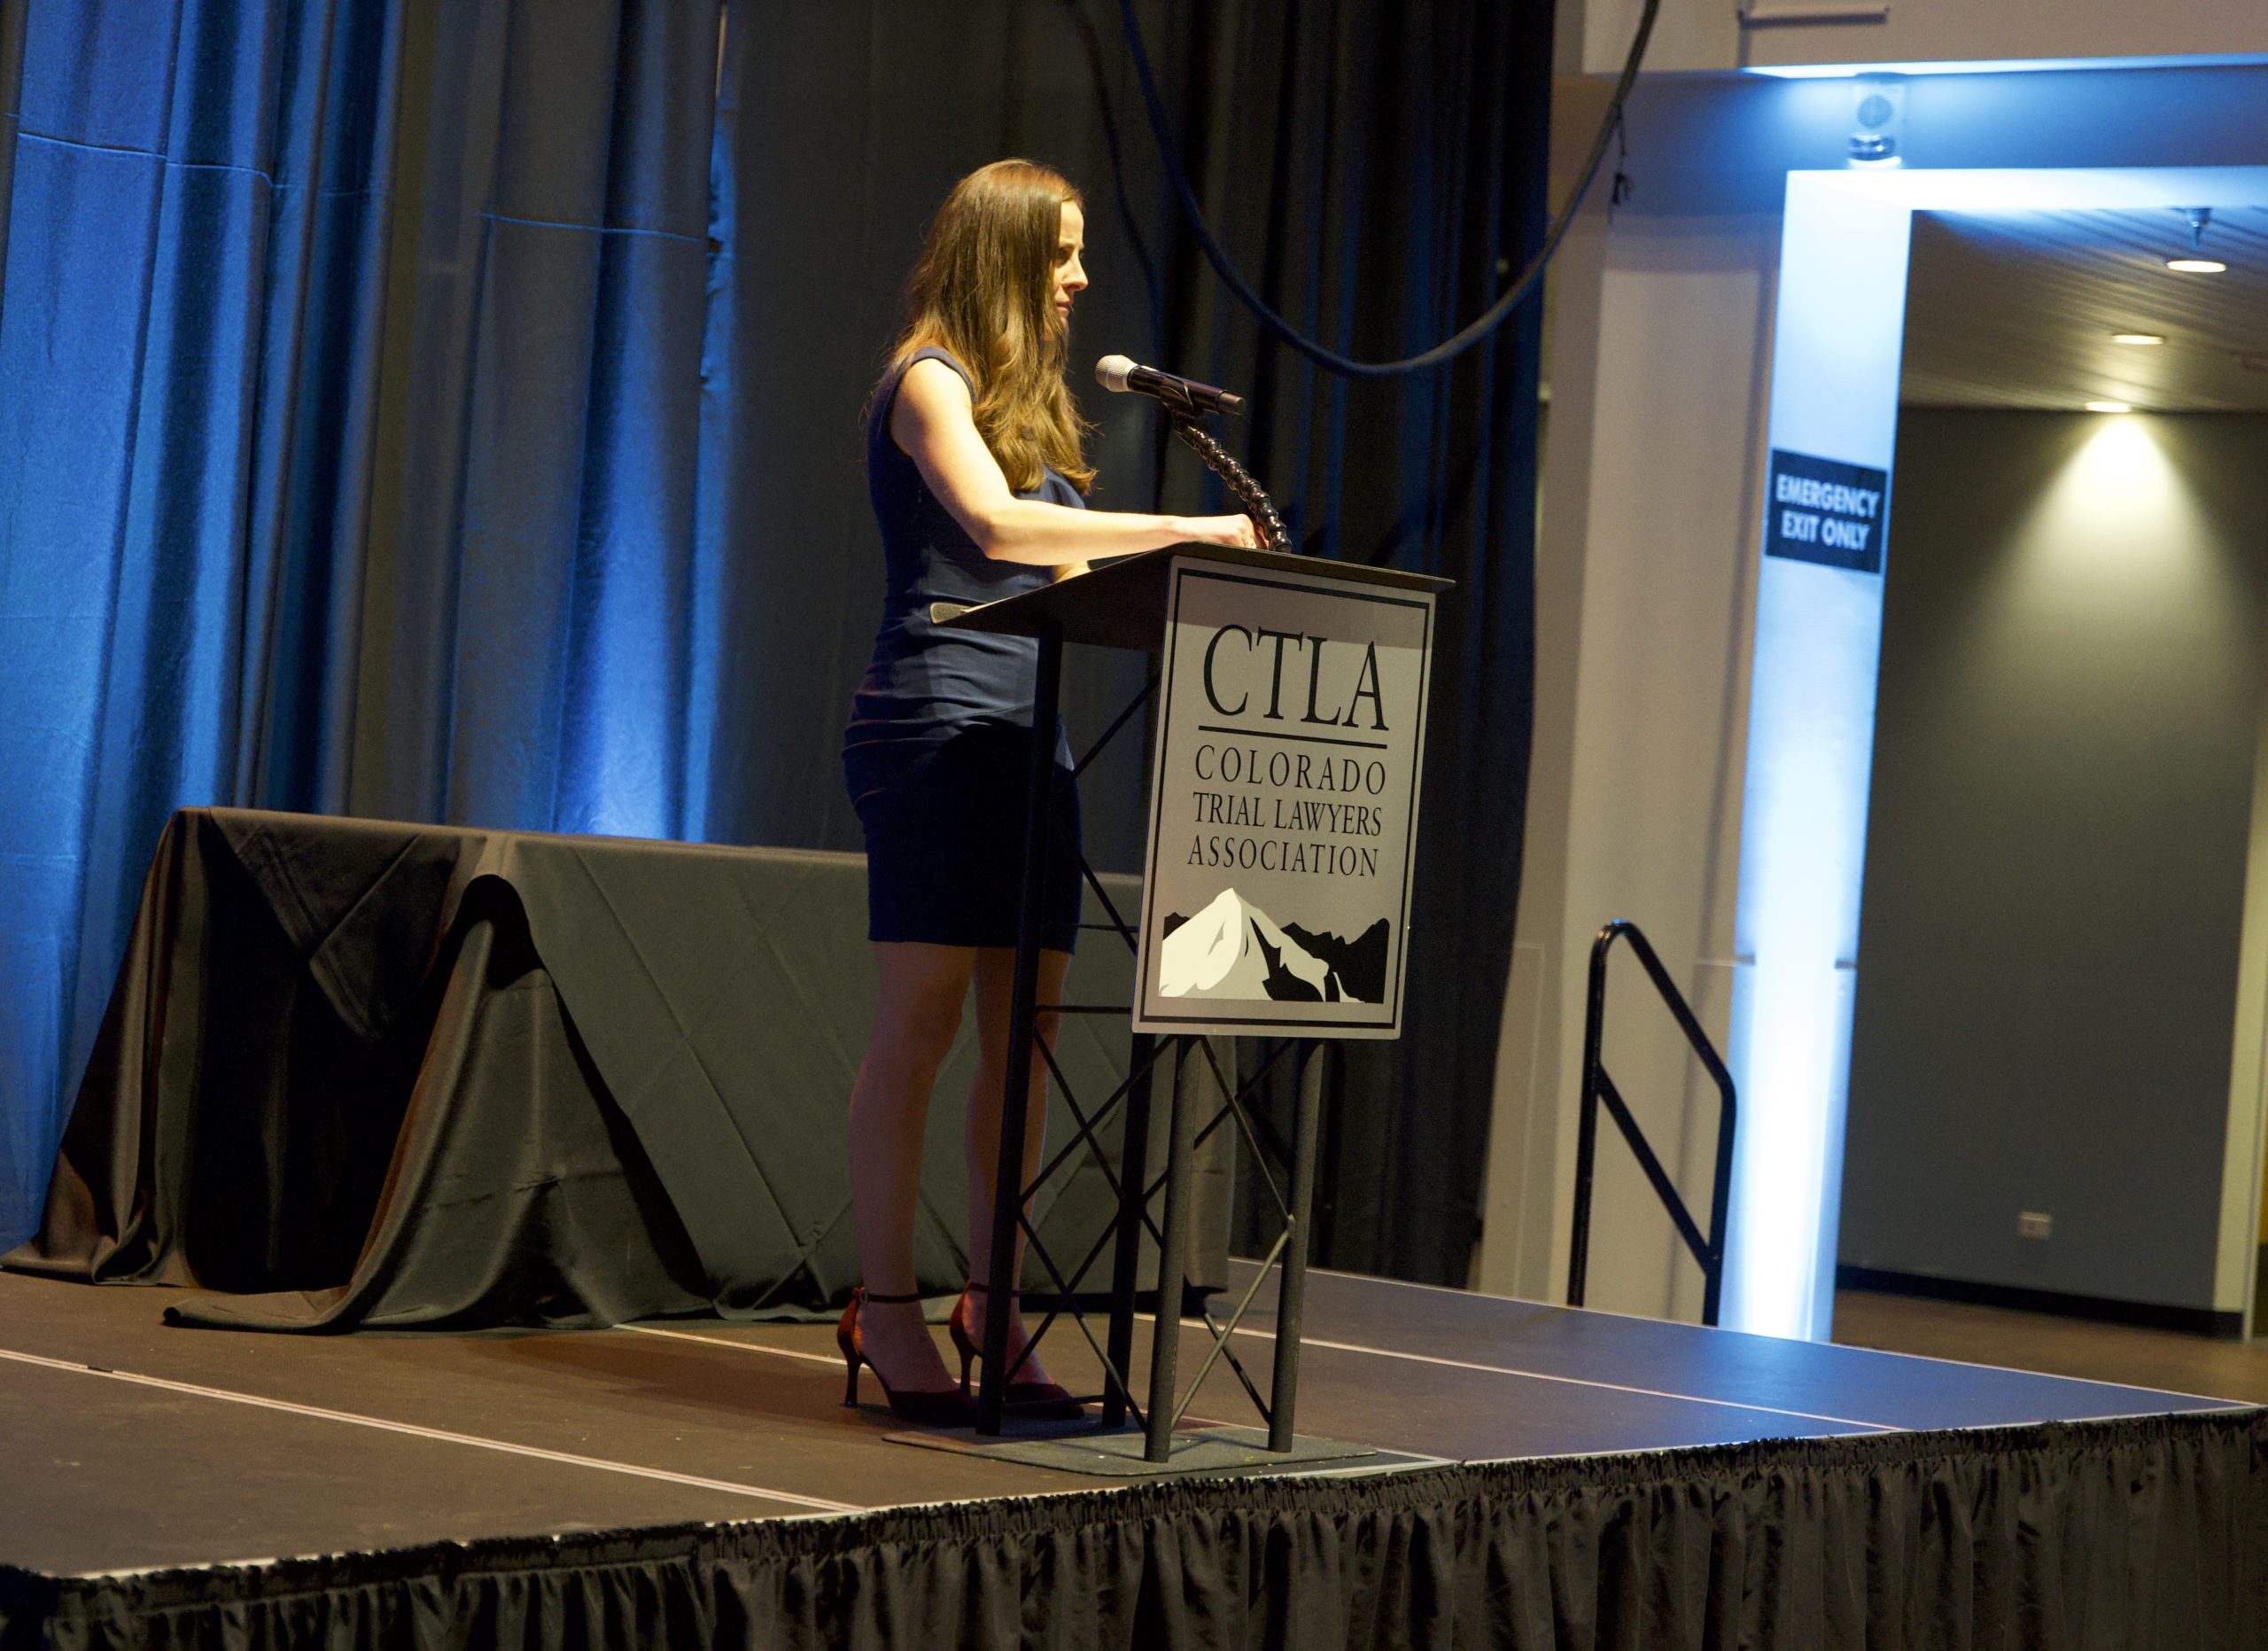 A young woman with long brown hair wearing a dark blue dress and heels stands in front of a podium on a stage that reads CTLA Colorado Trial Lawyers Association.